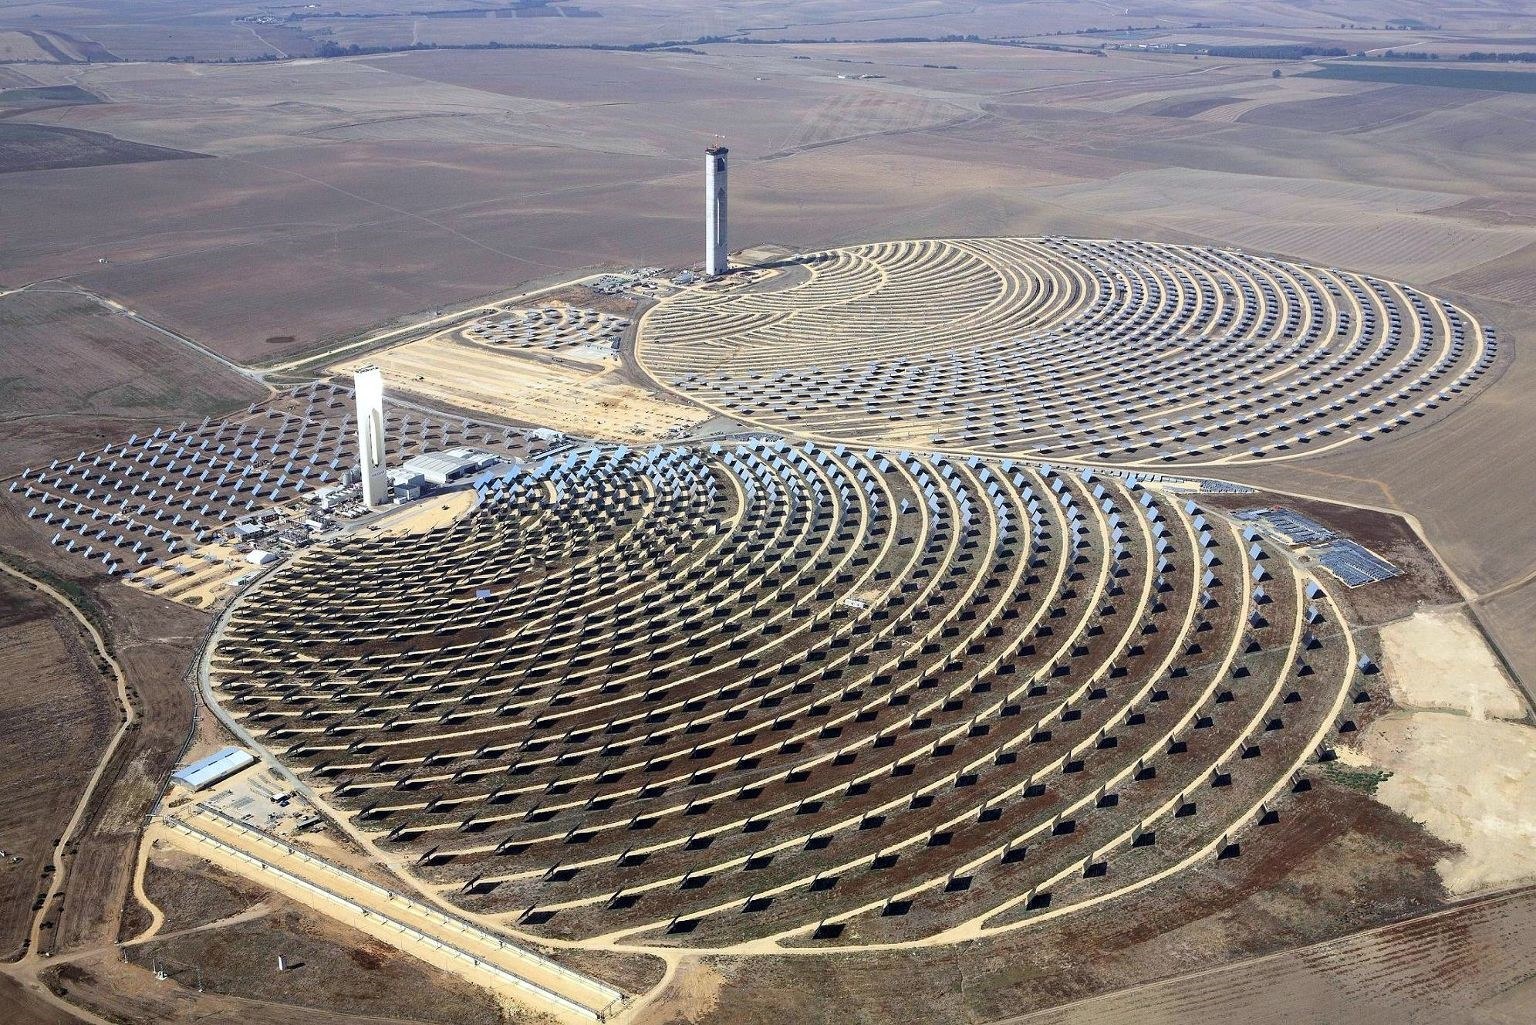 Solar Power Tower and Panels in Spain